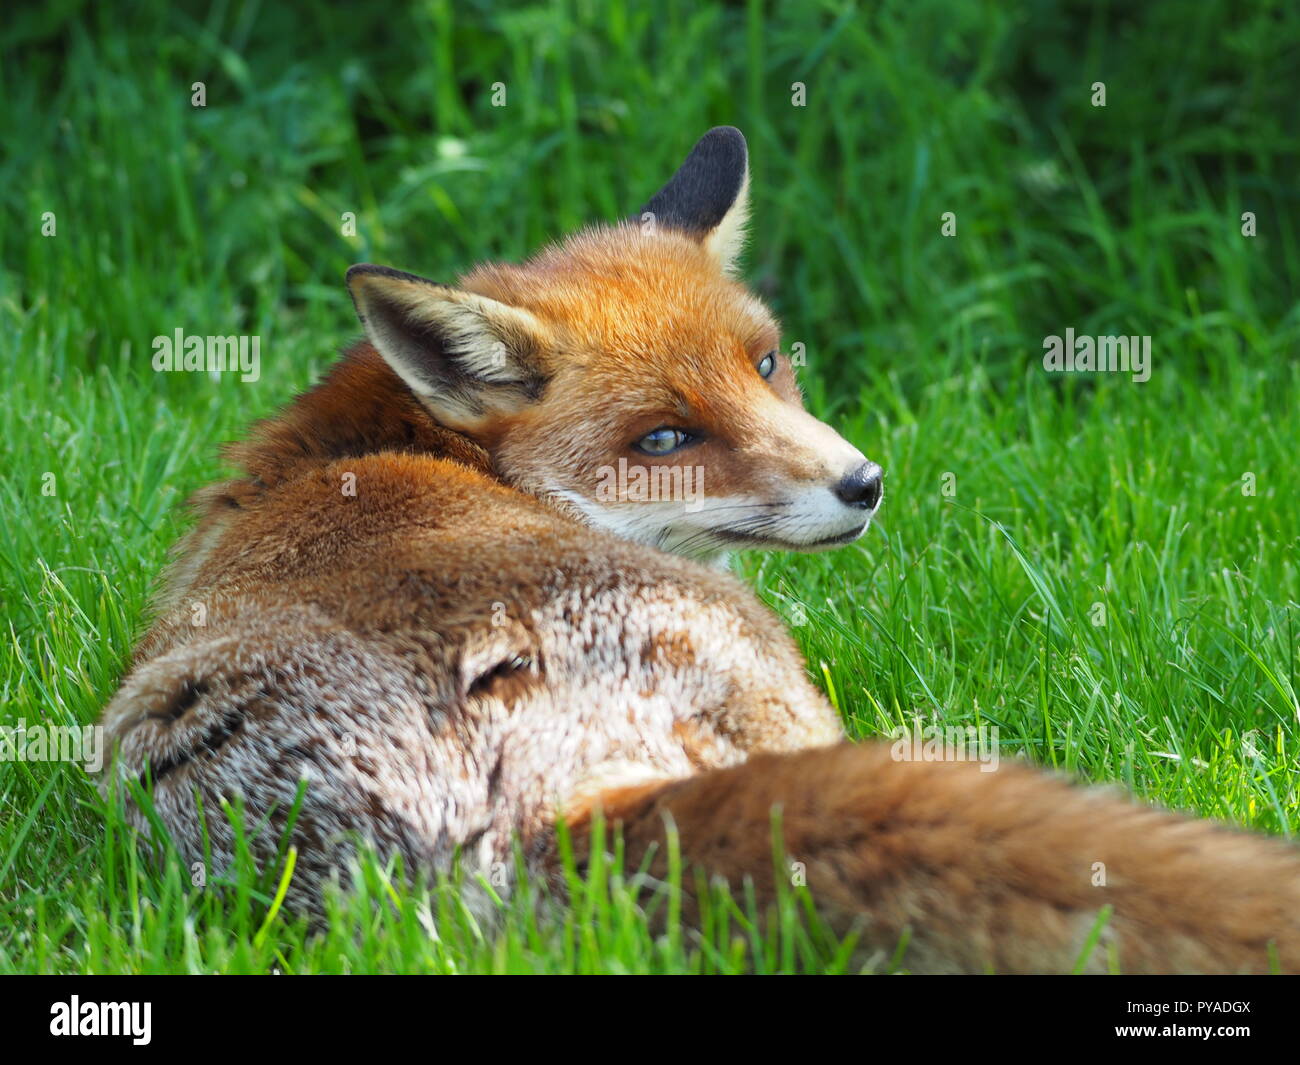 Looking foxy! A female vixen with a bushy tail looks over her shoulder at the photographer Stock Photo